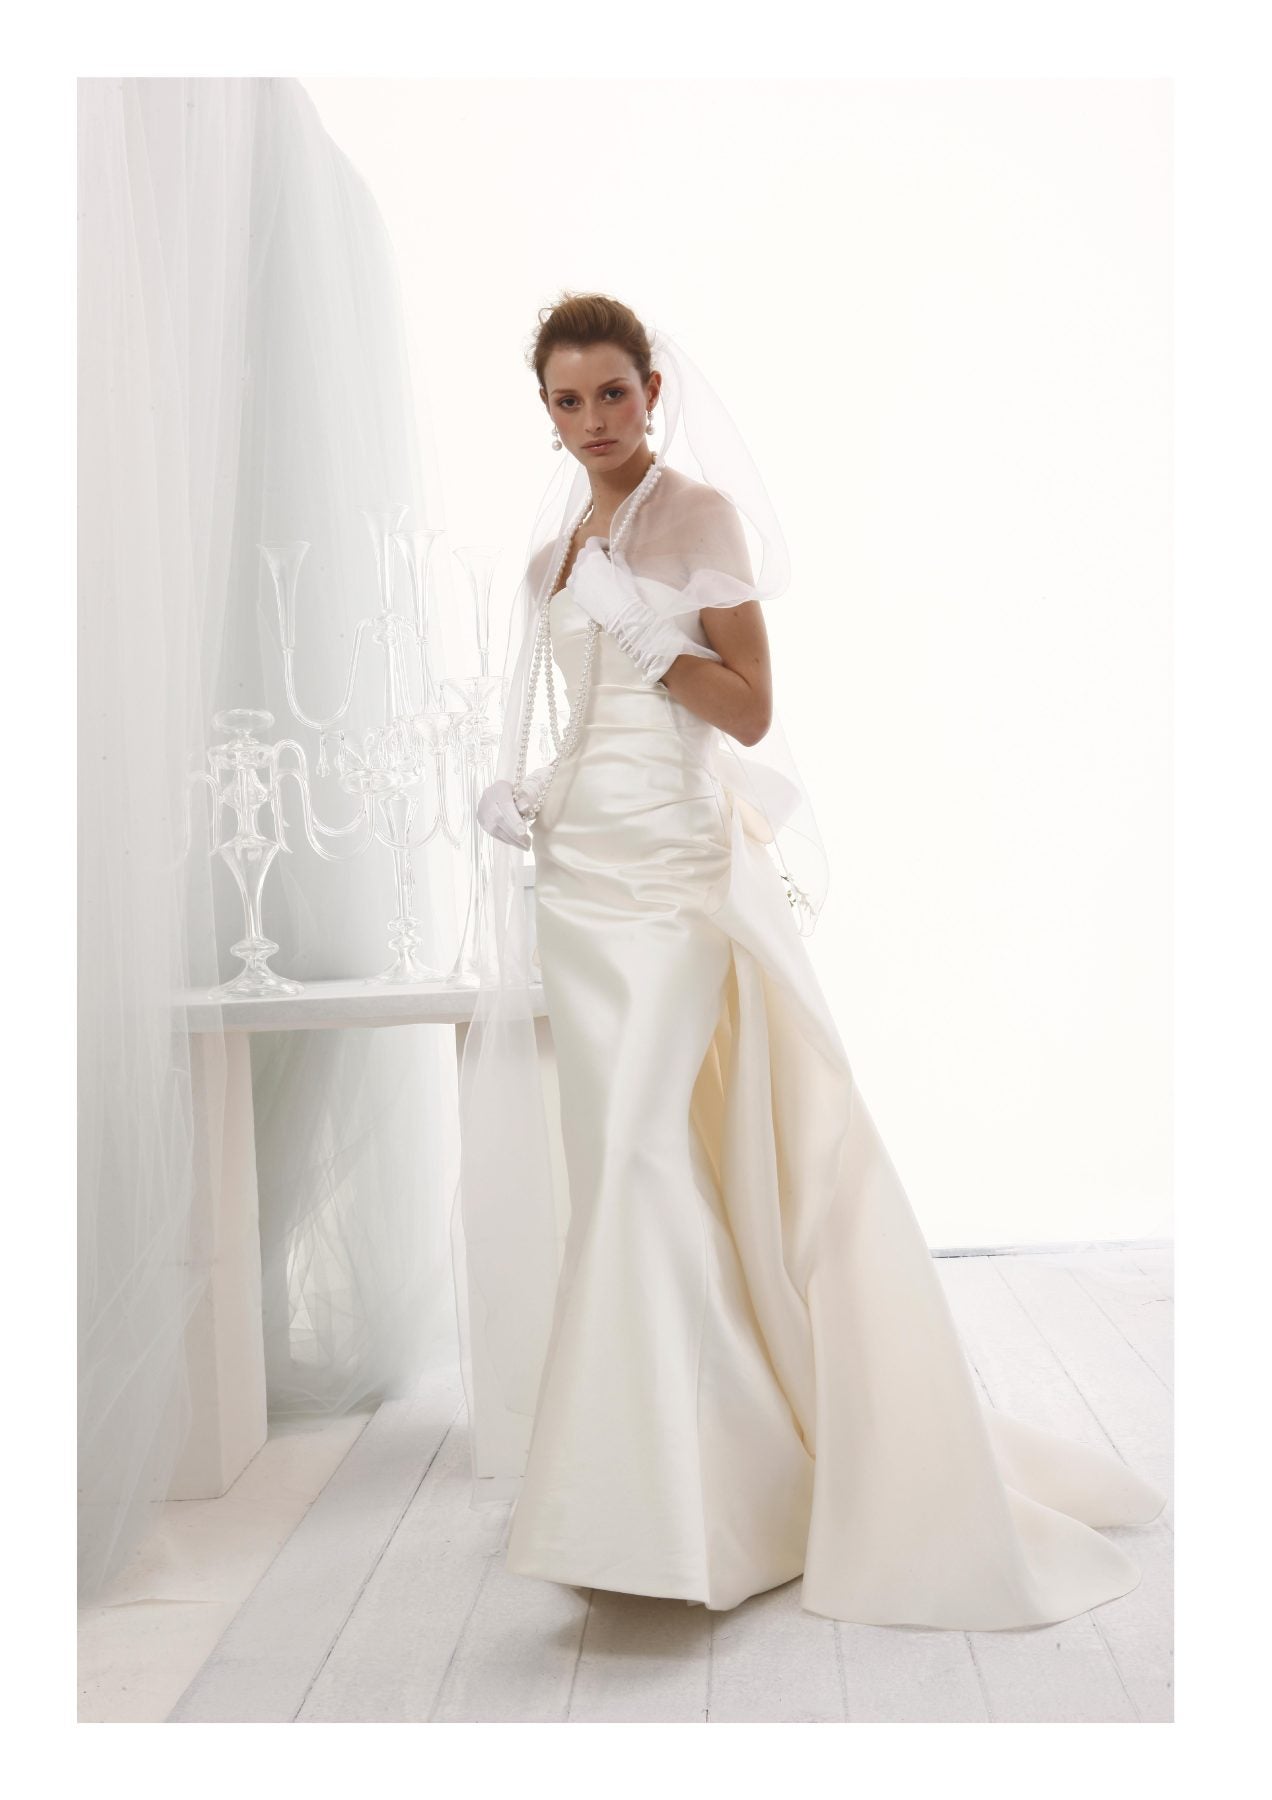 le-spose-di-gio-straight-neckline-fit-and-flare-wedding-dress-with-back-bow-33258971-1272x1800.jpg